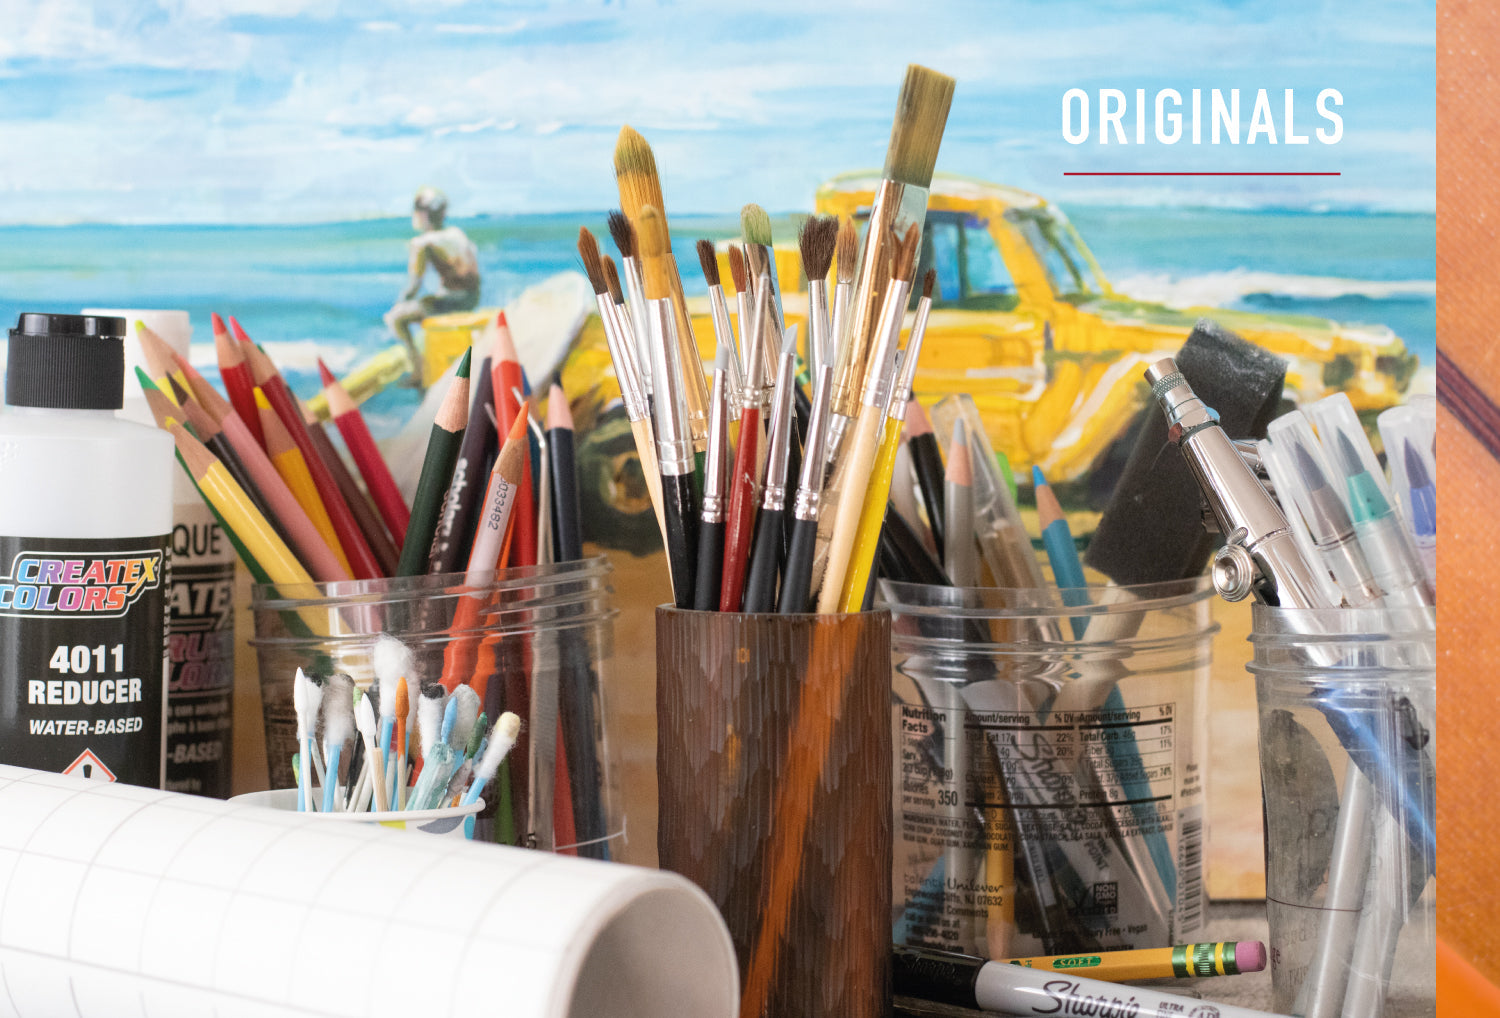 Original Paintings available. Photo of brushes, pens and pencils in art studio.